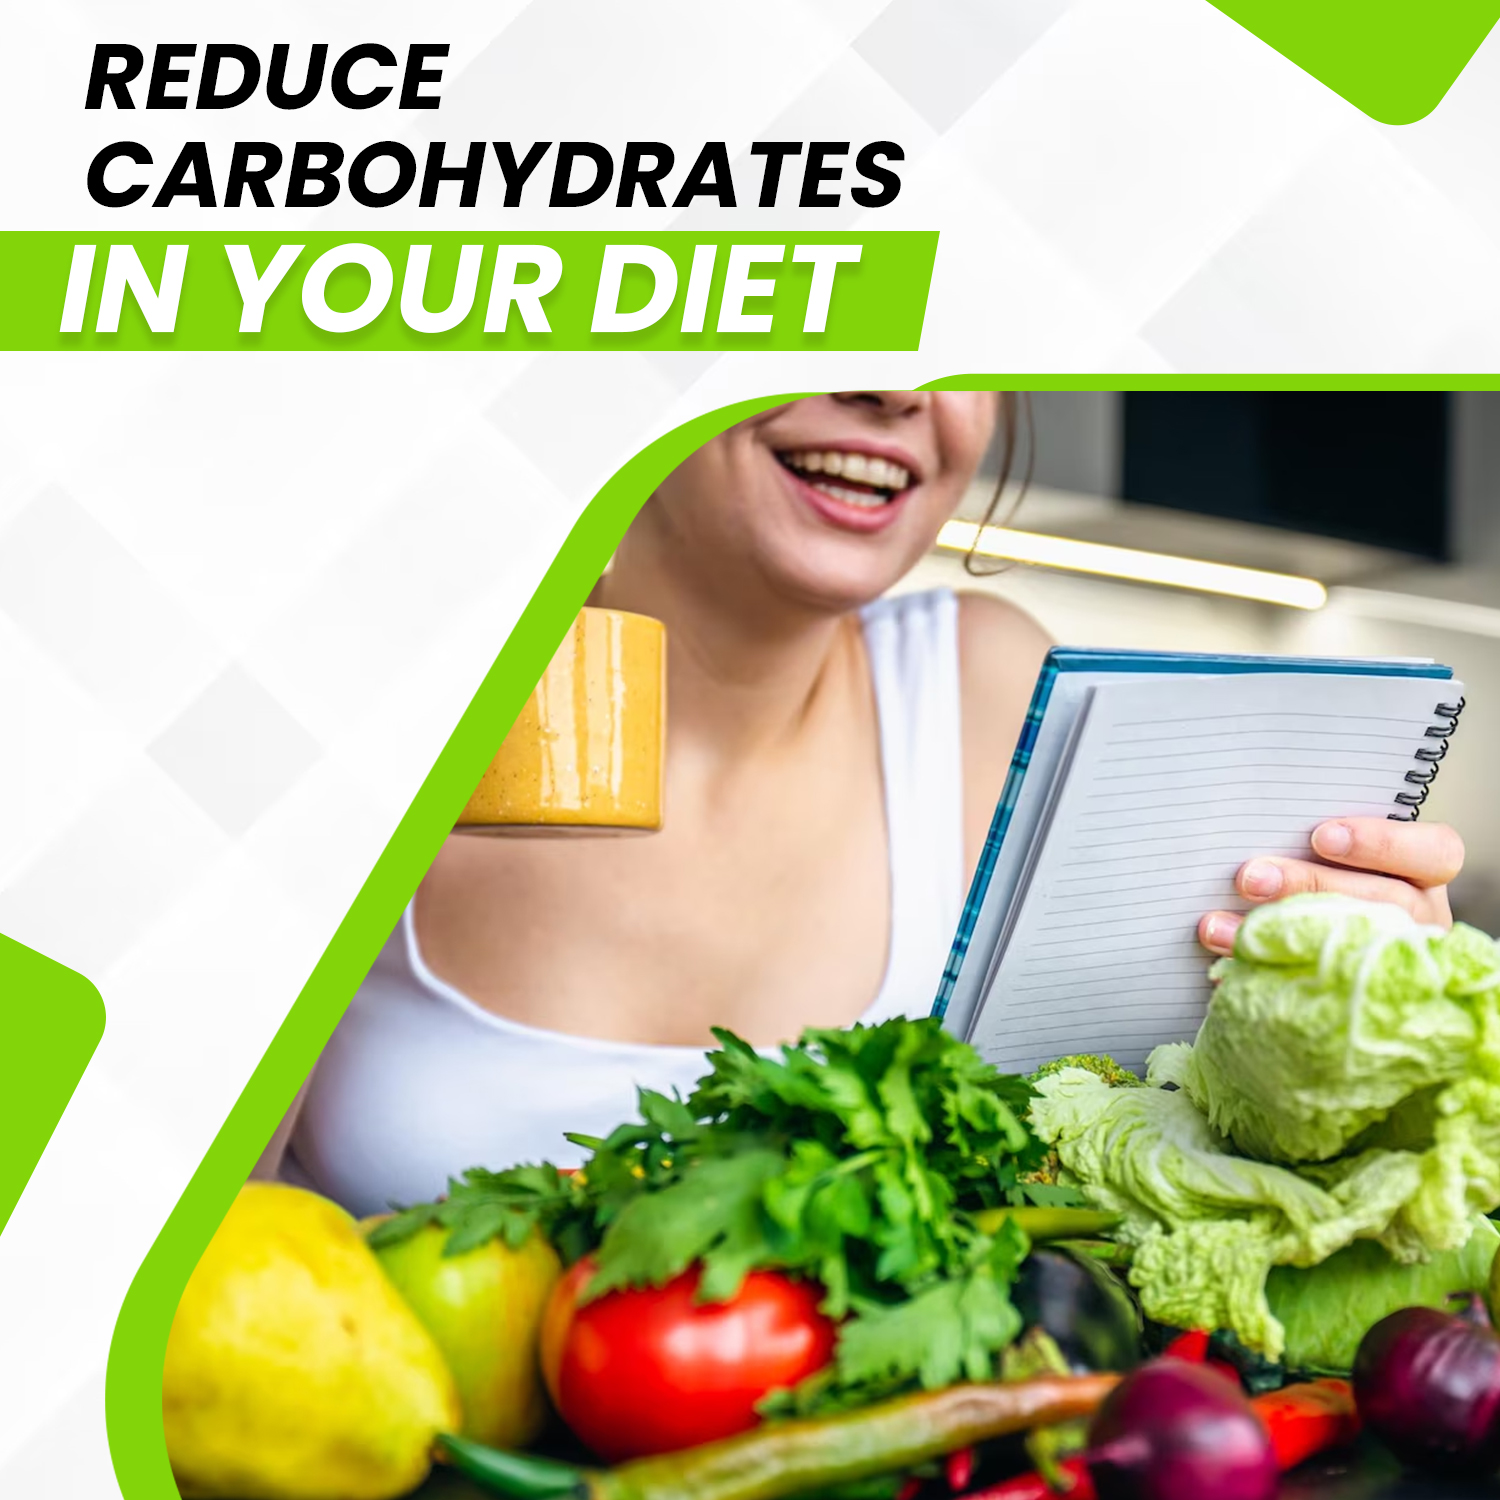 Reduce Carbohydrates in Your Diet